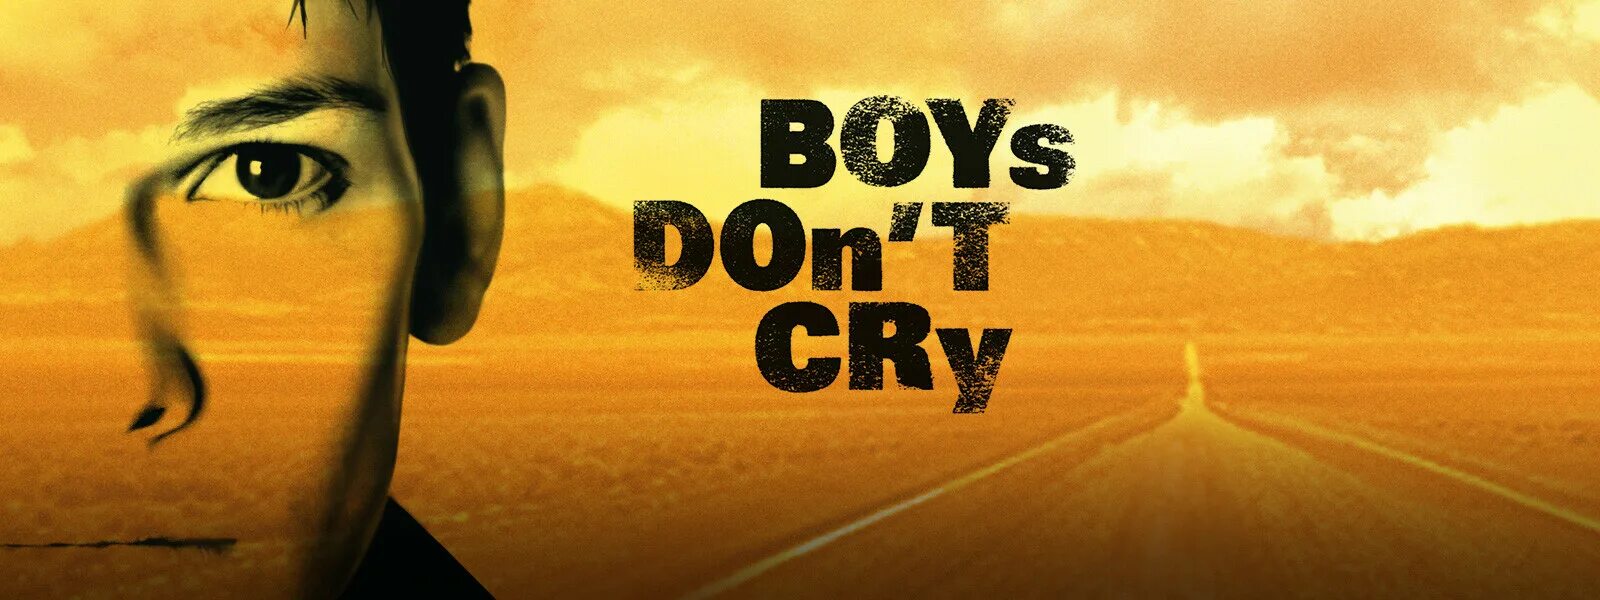 Boys don`t Cry. Обложка альбома boys don't Cry. Бойс донт край Гон. Гон флад boys don't Cry. Boys dont